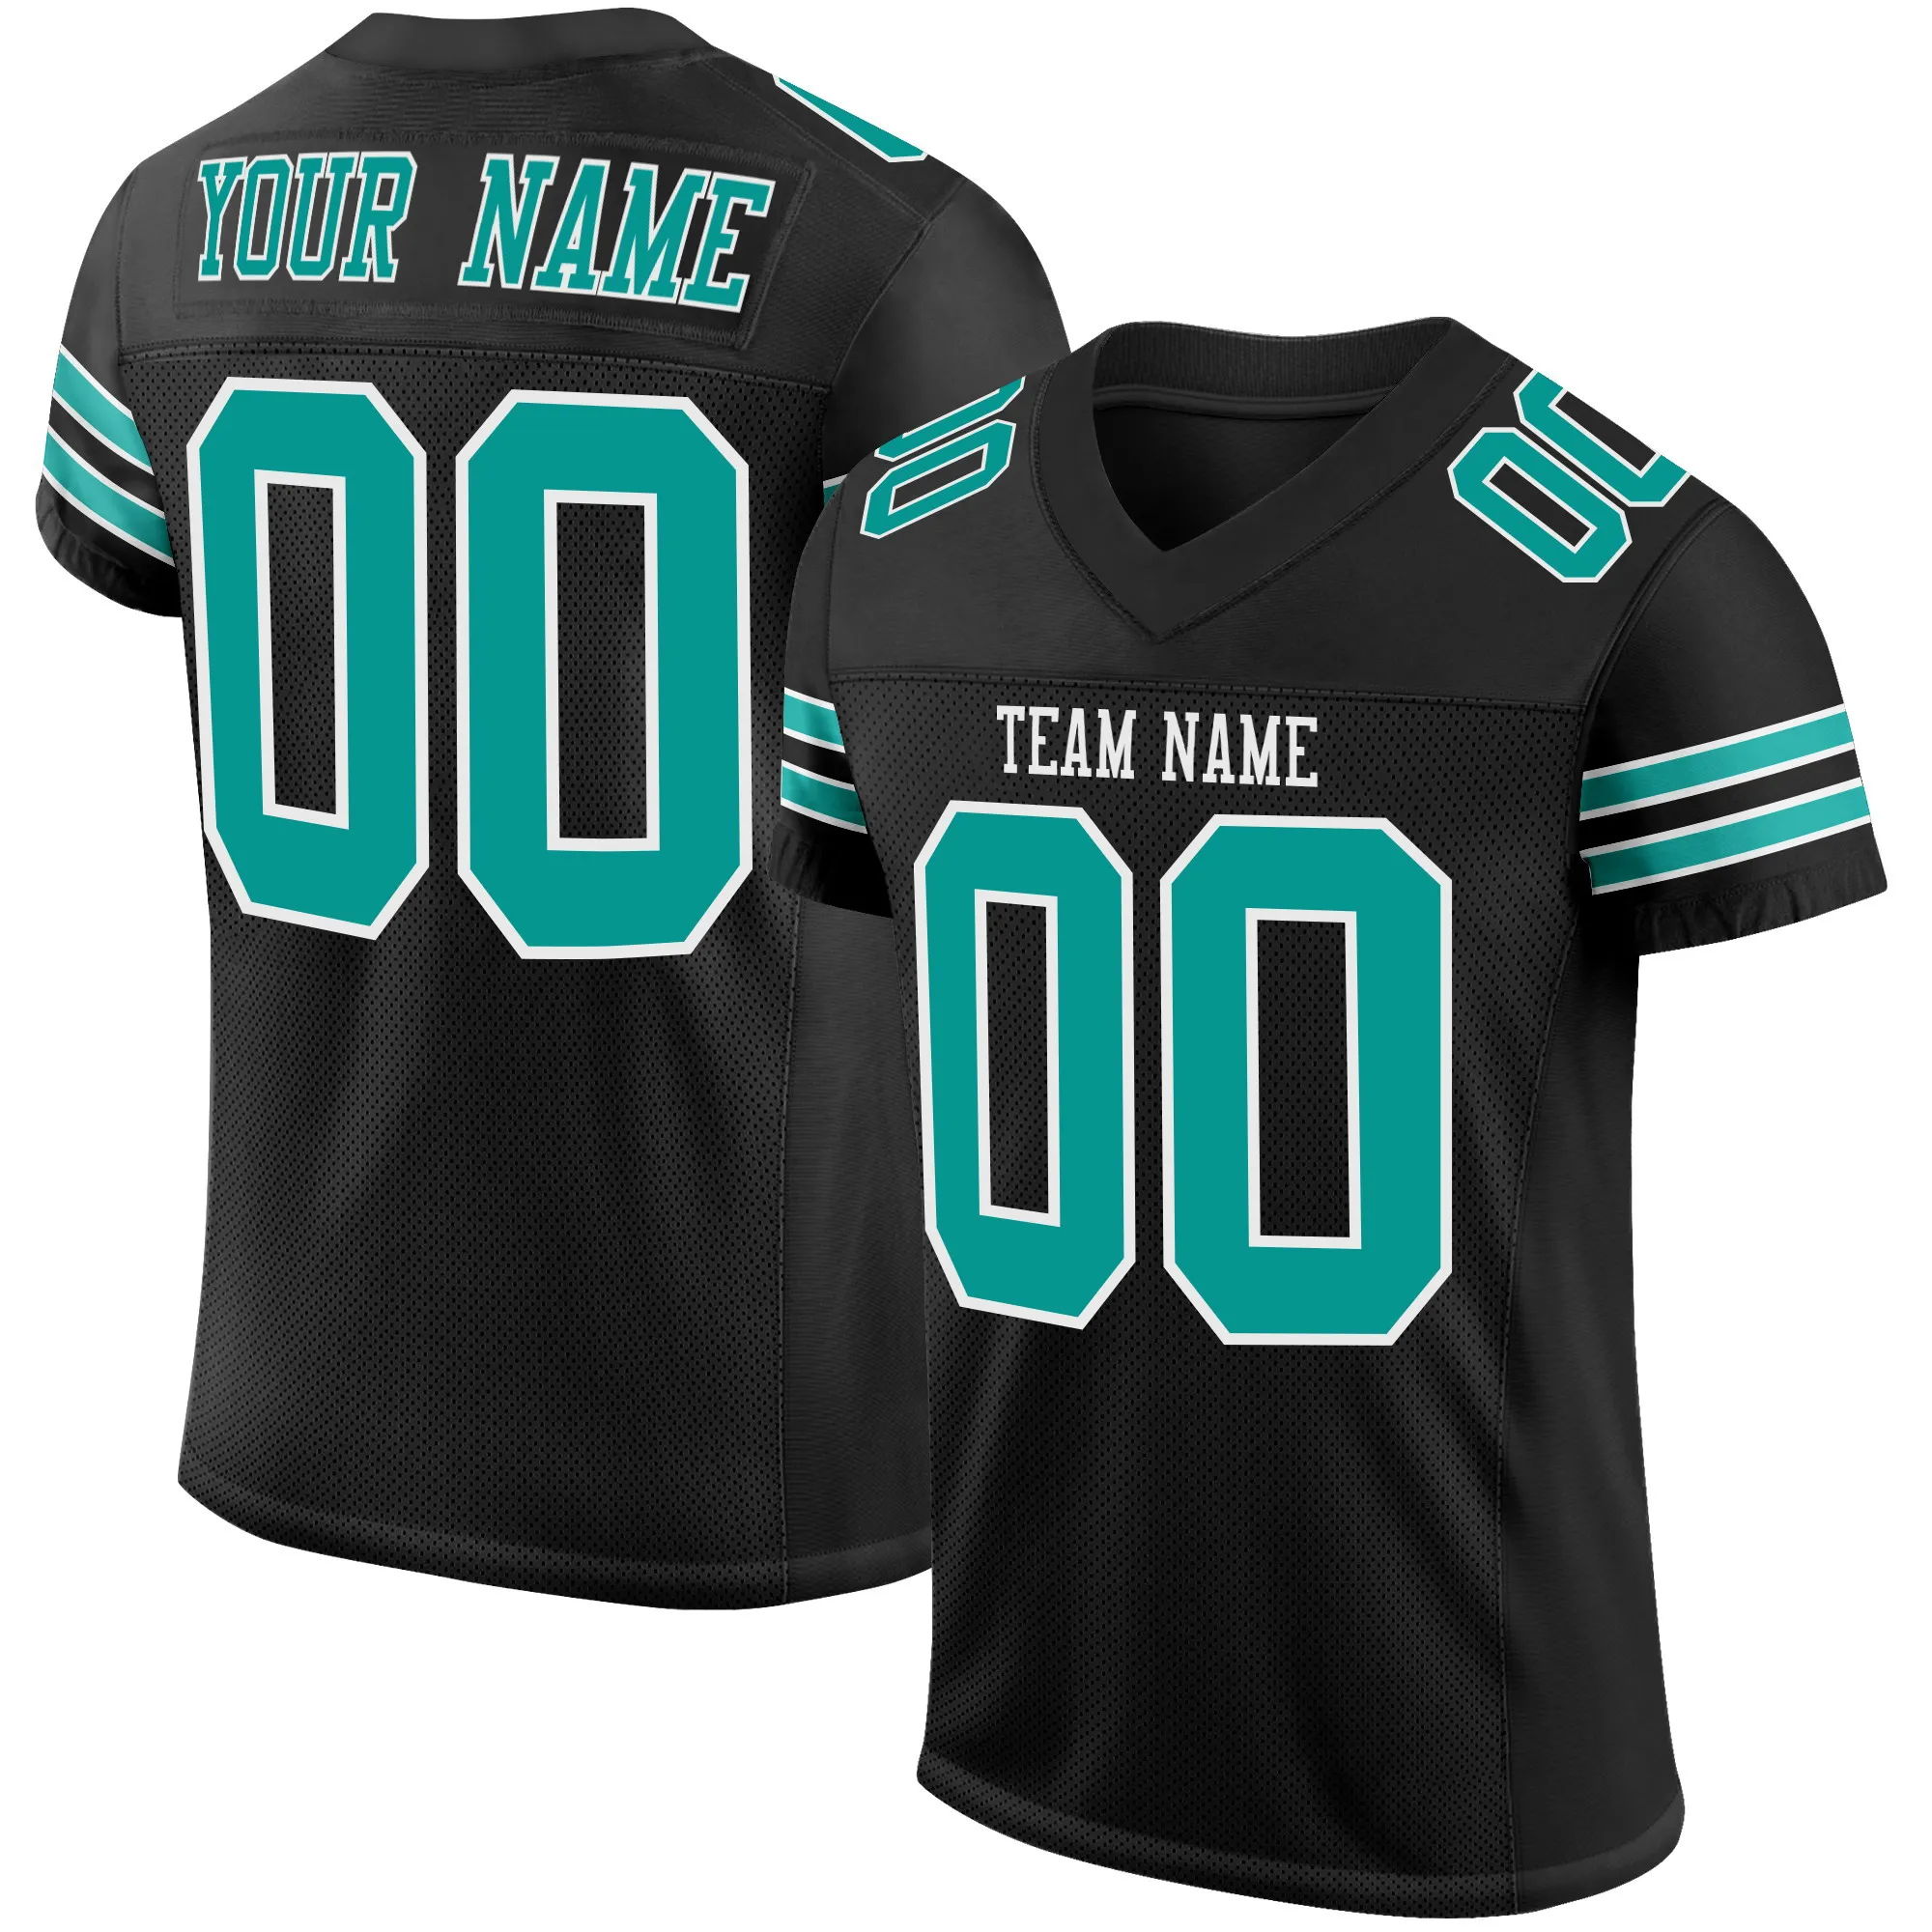 wholesale-custom-american-football-jerseys-printed-team-name-number-rugby-jersey-breathable-stretch-football-shirt-for-men-kids